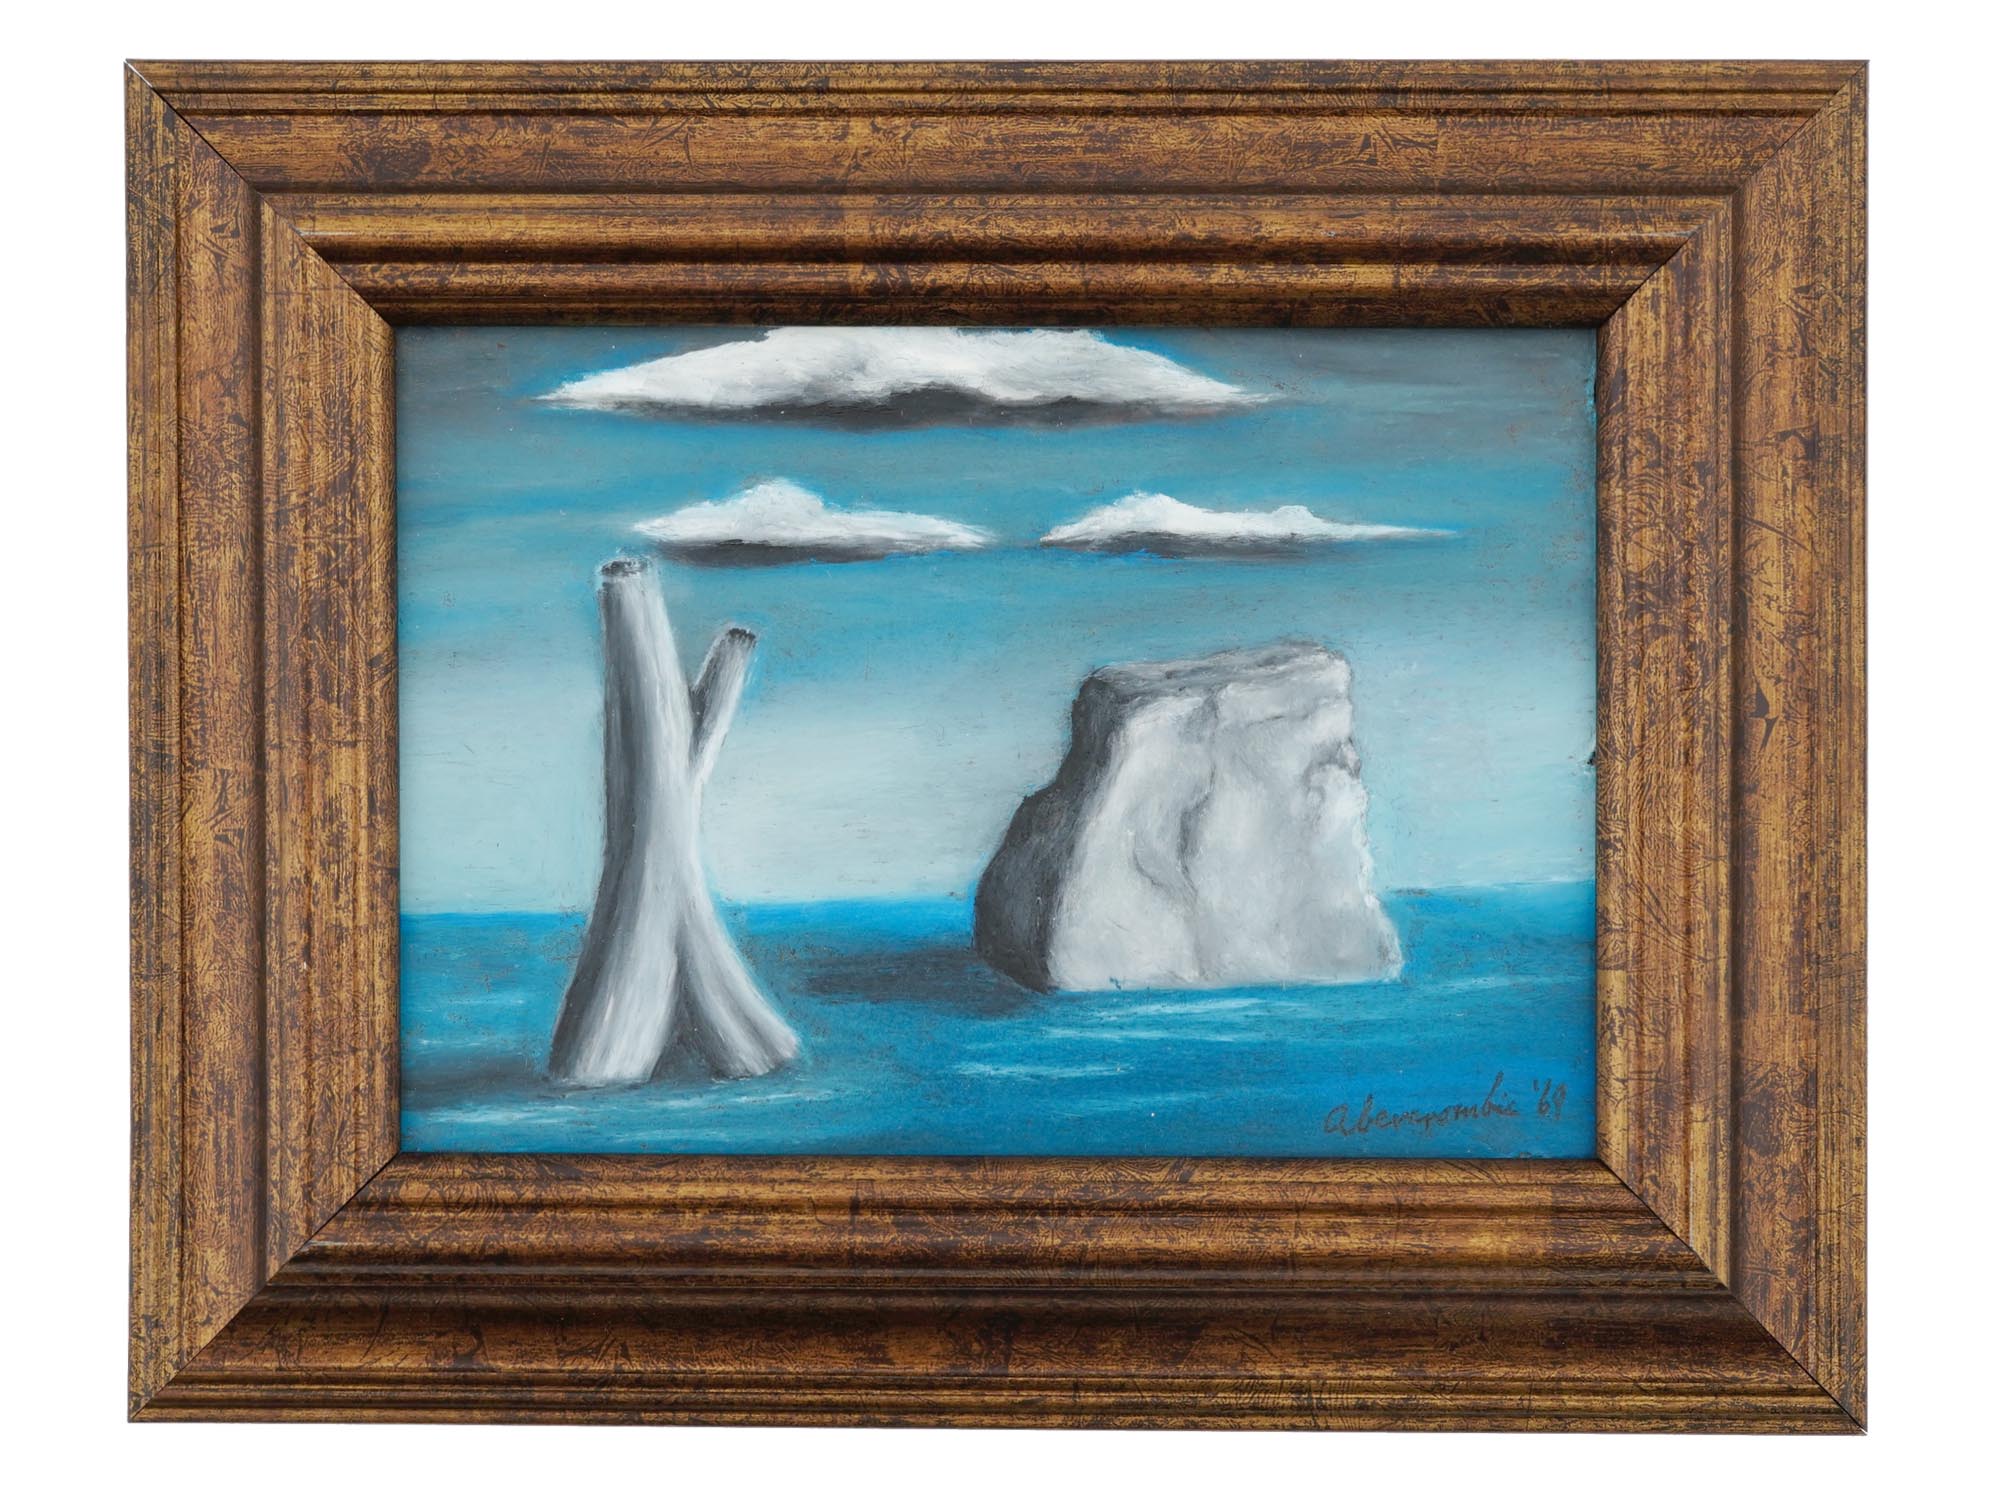 GERTRUDE ABERCROMBIE OIL ON BOARD PAINTING, 1969 PIC-1